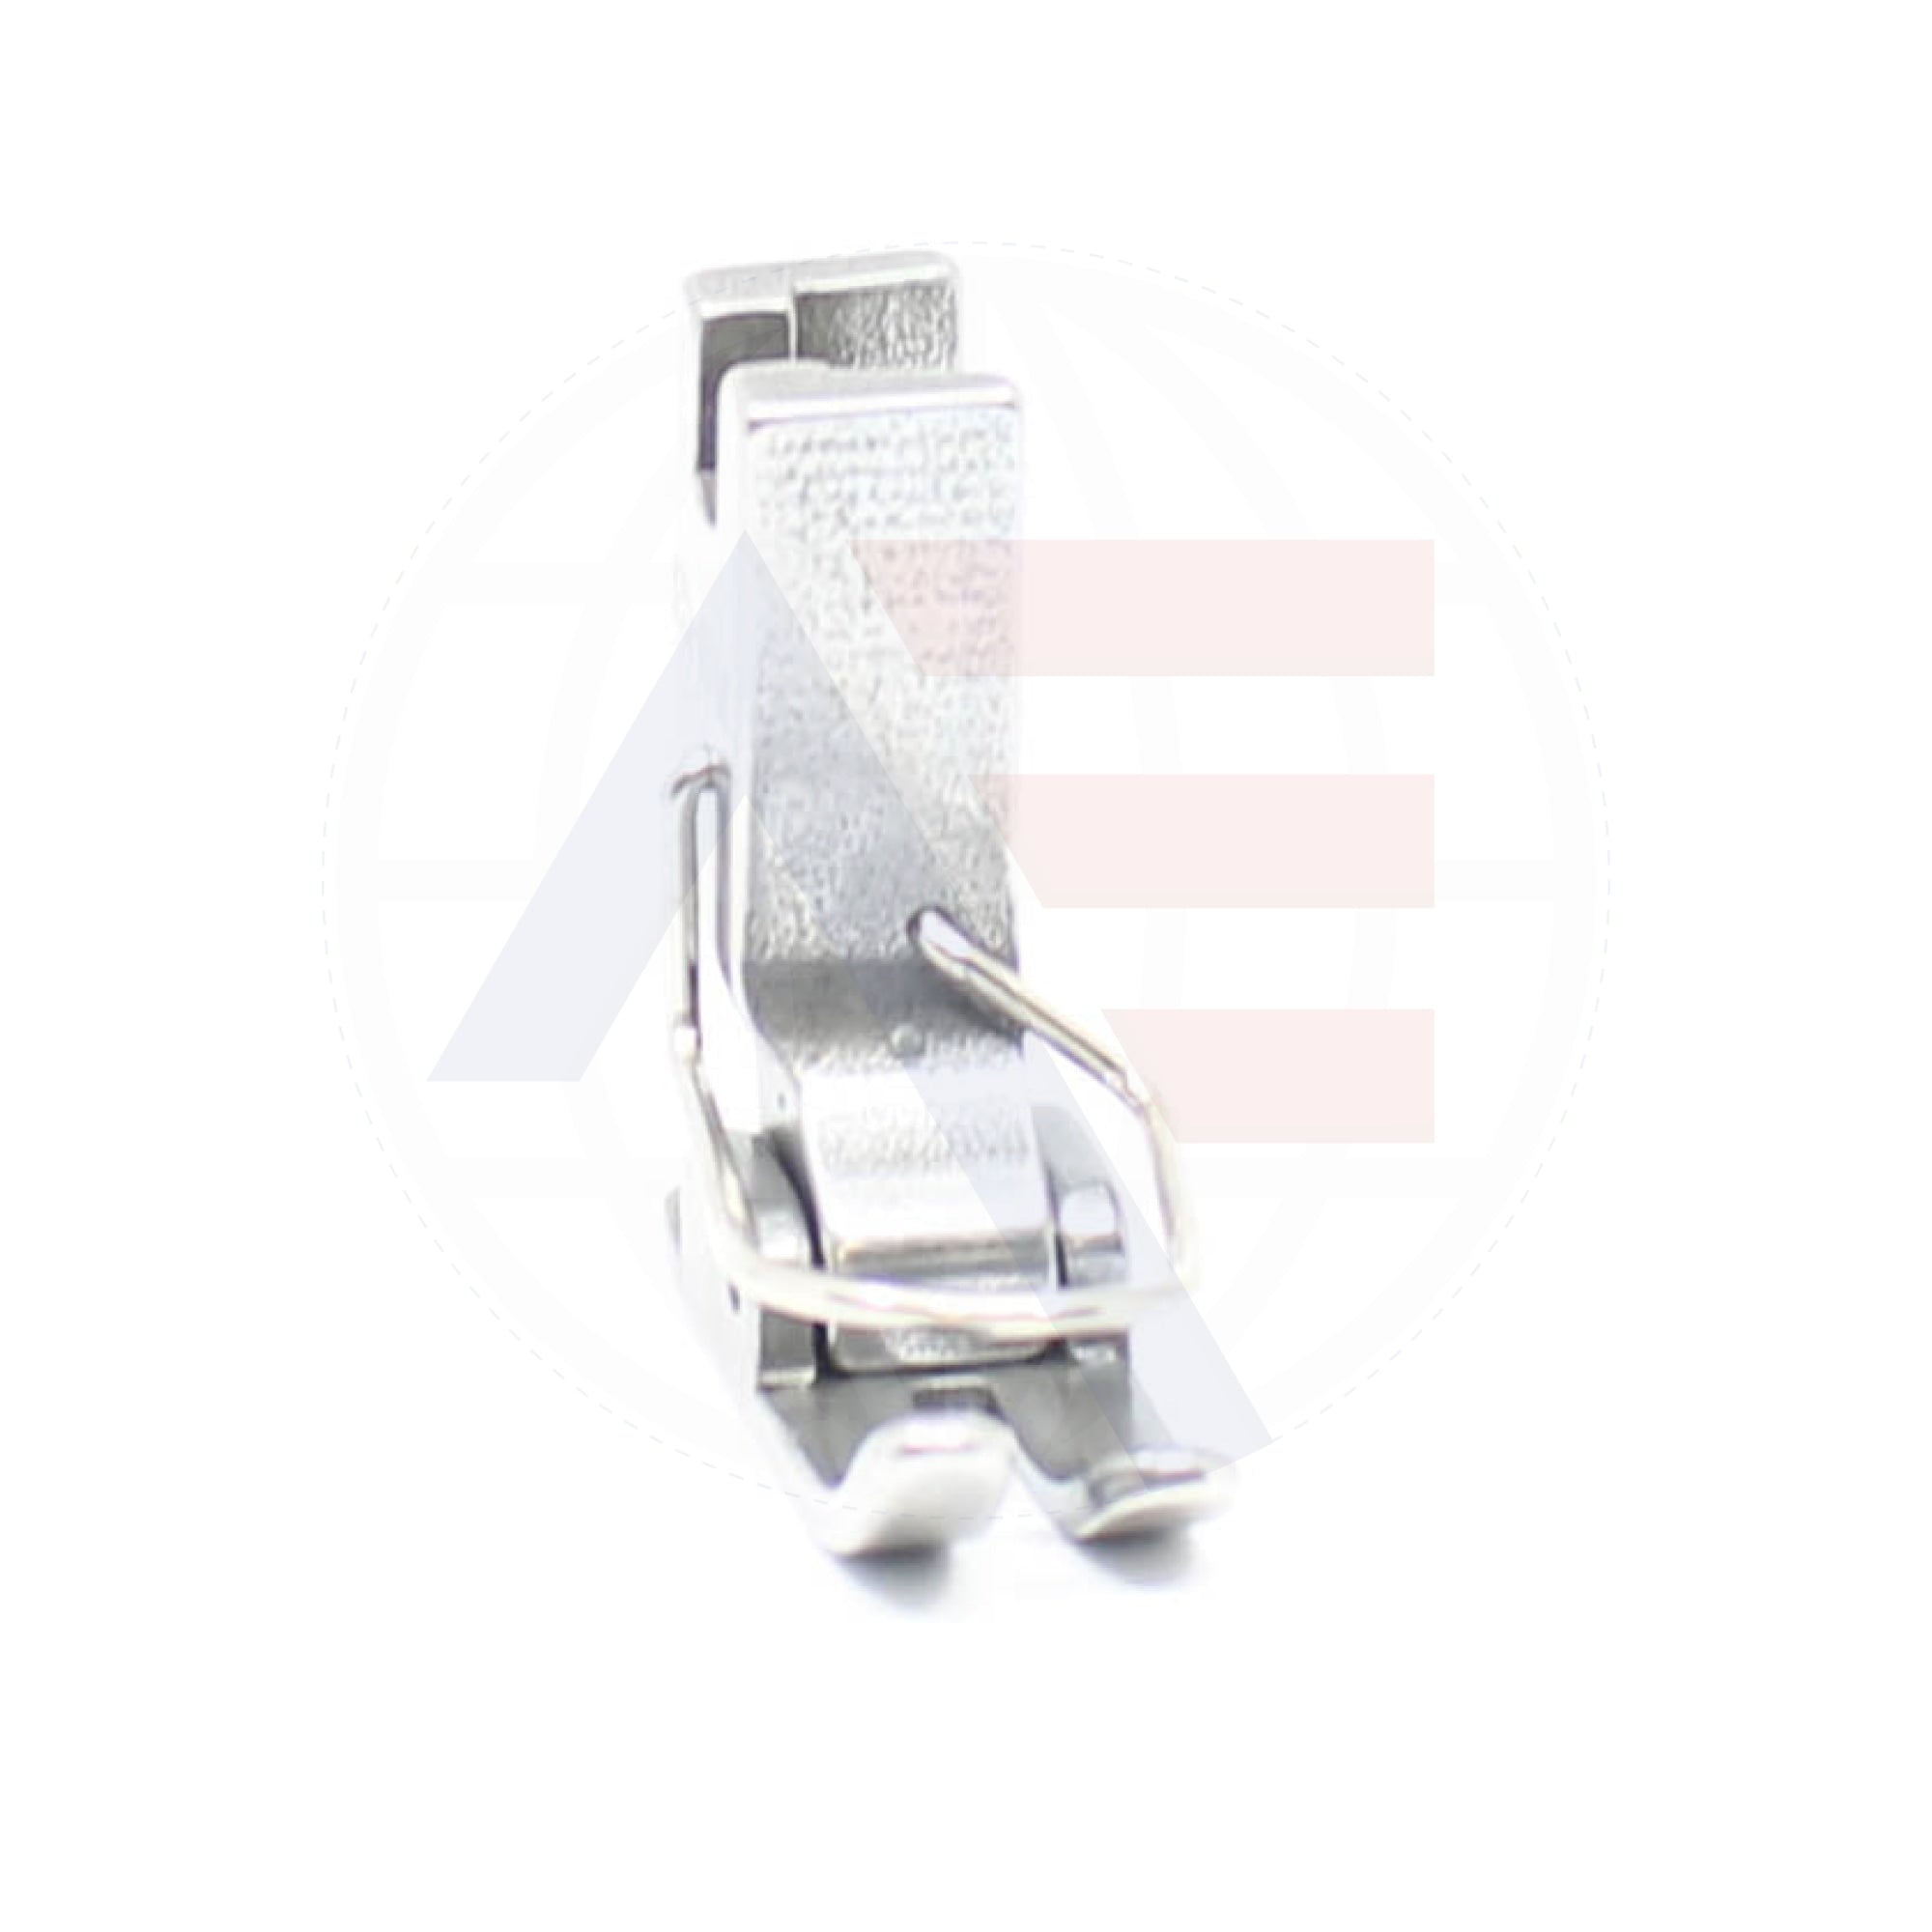 B15244120A0 Needle Feed Foot Sewing Machine Spare Parts